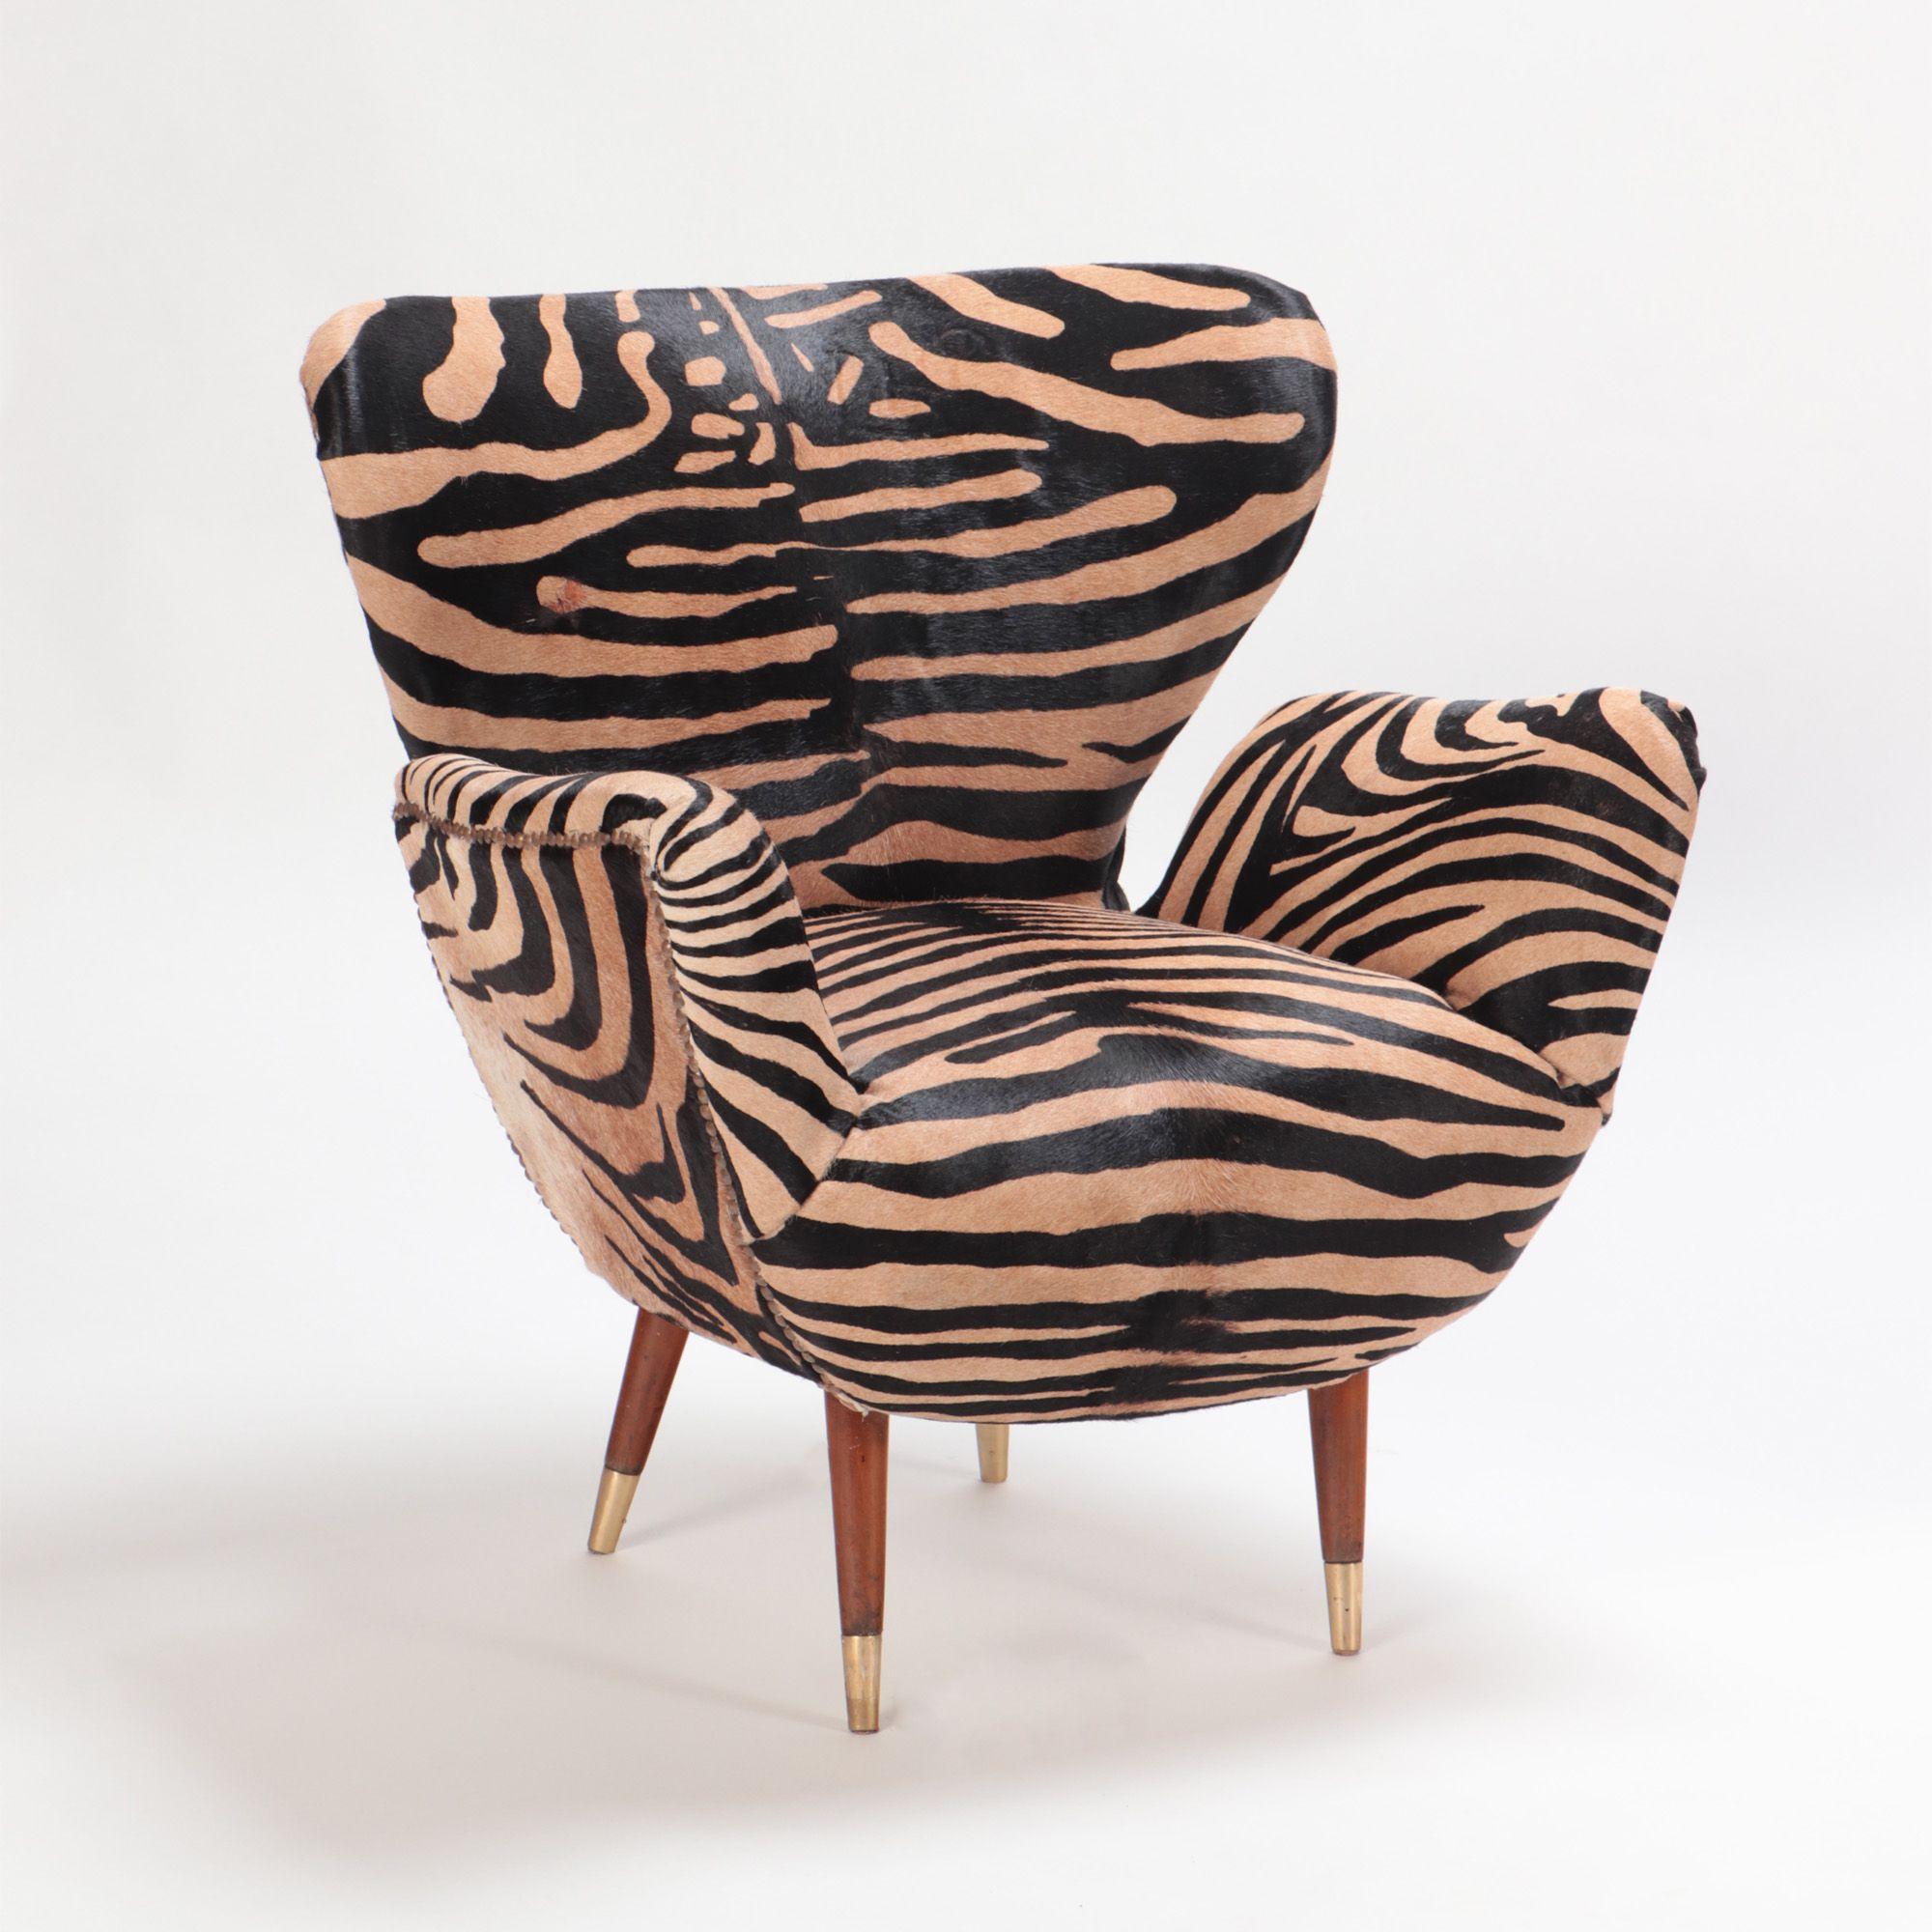 A pair of mid-century Italian wingback chairs, upholstered with zebra print leather, in the style of Paolo Buffa, circa 1950. Flared wooden legs ending with brass details.